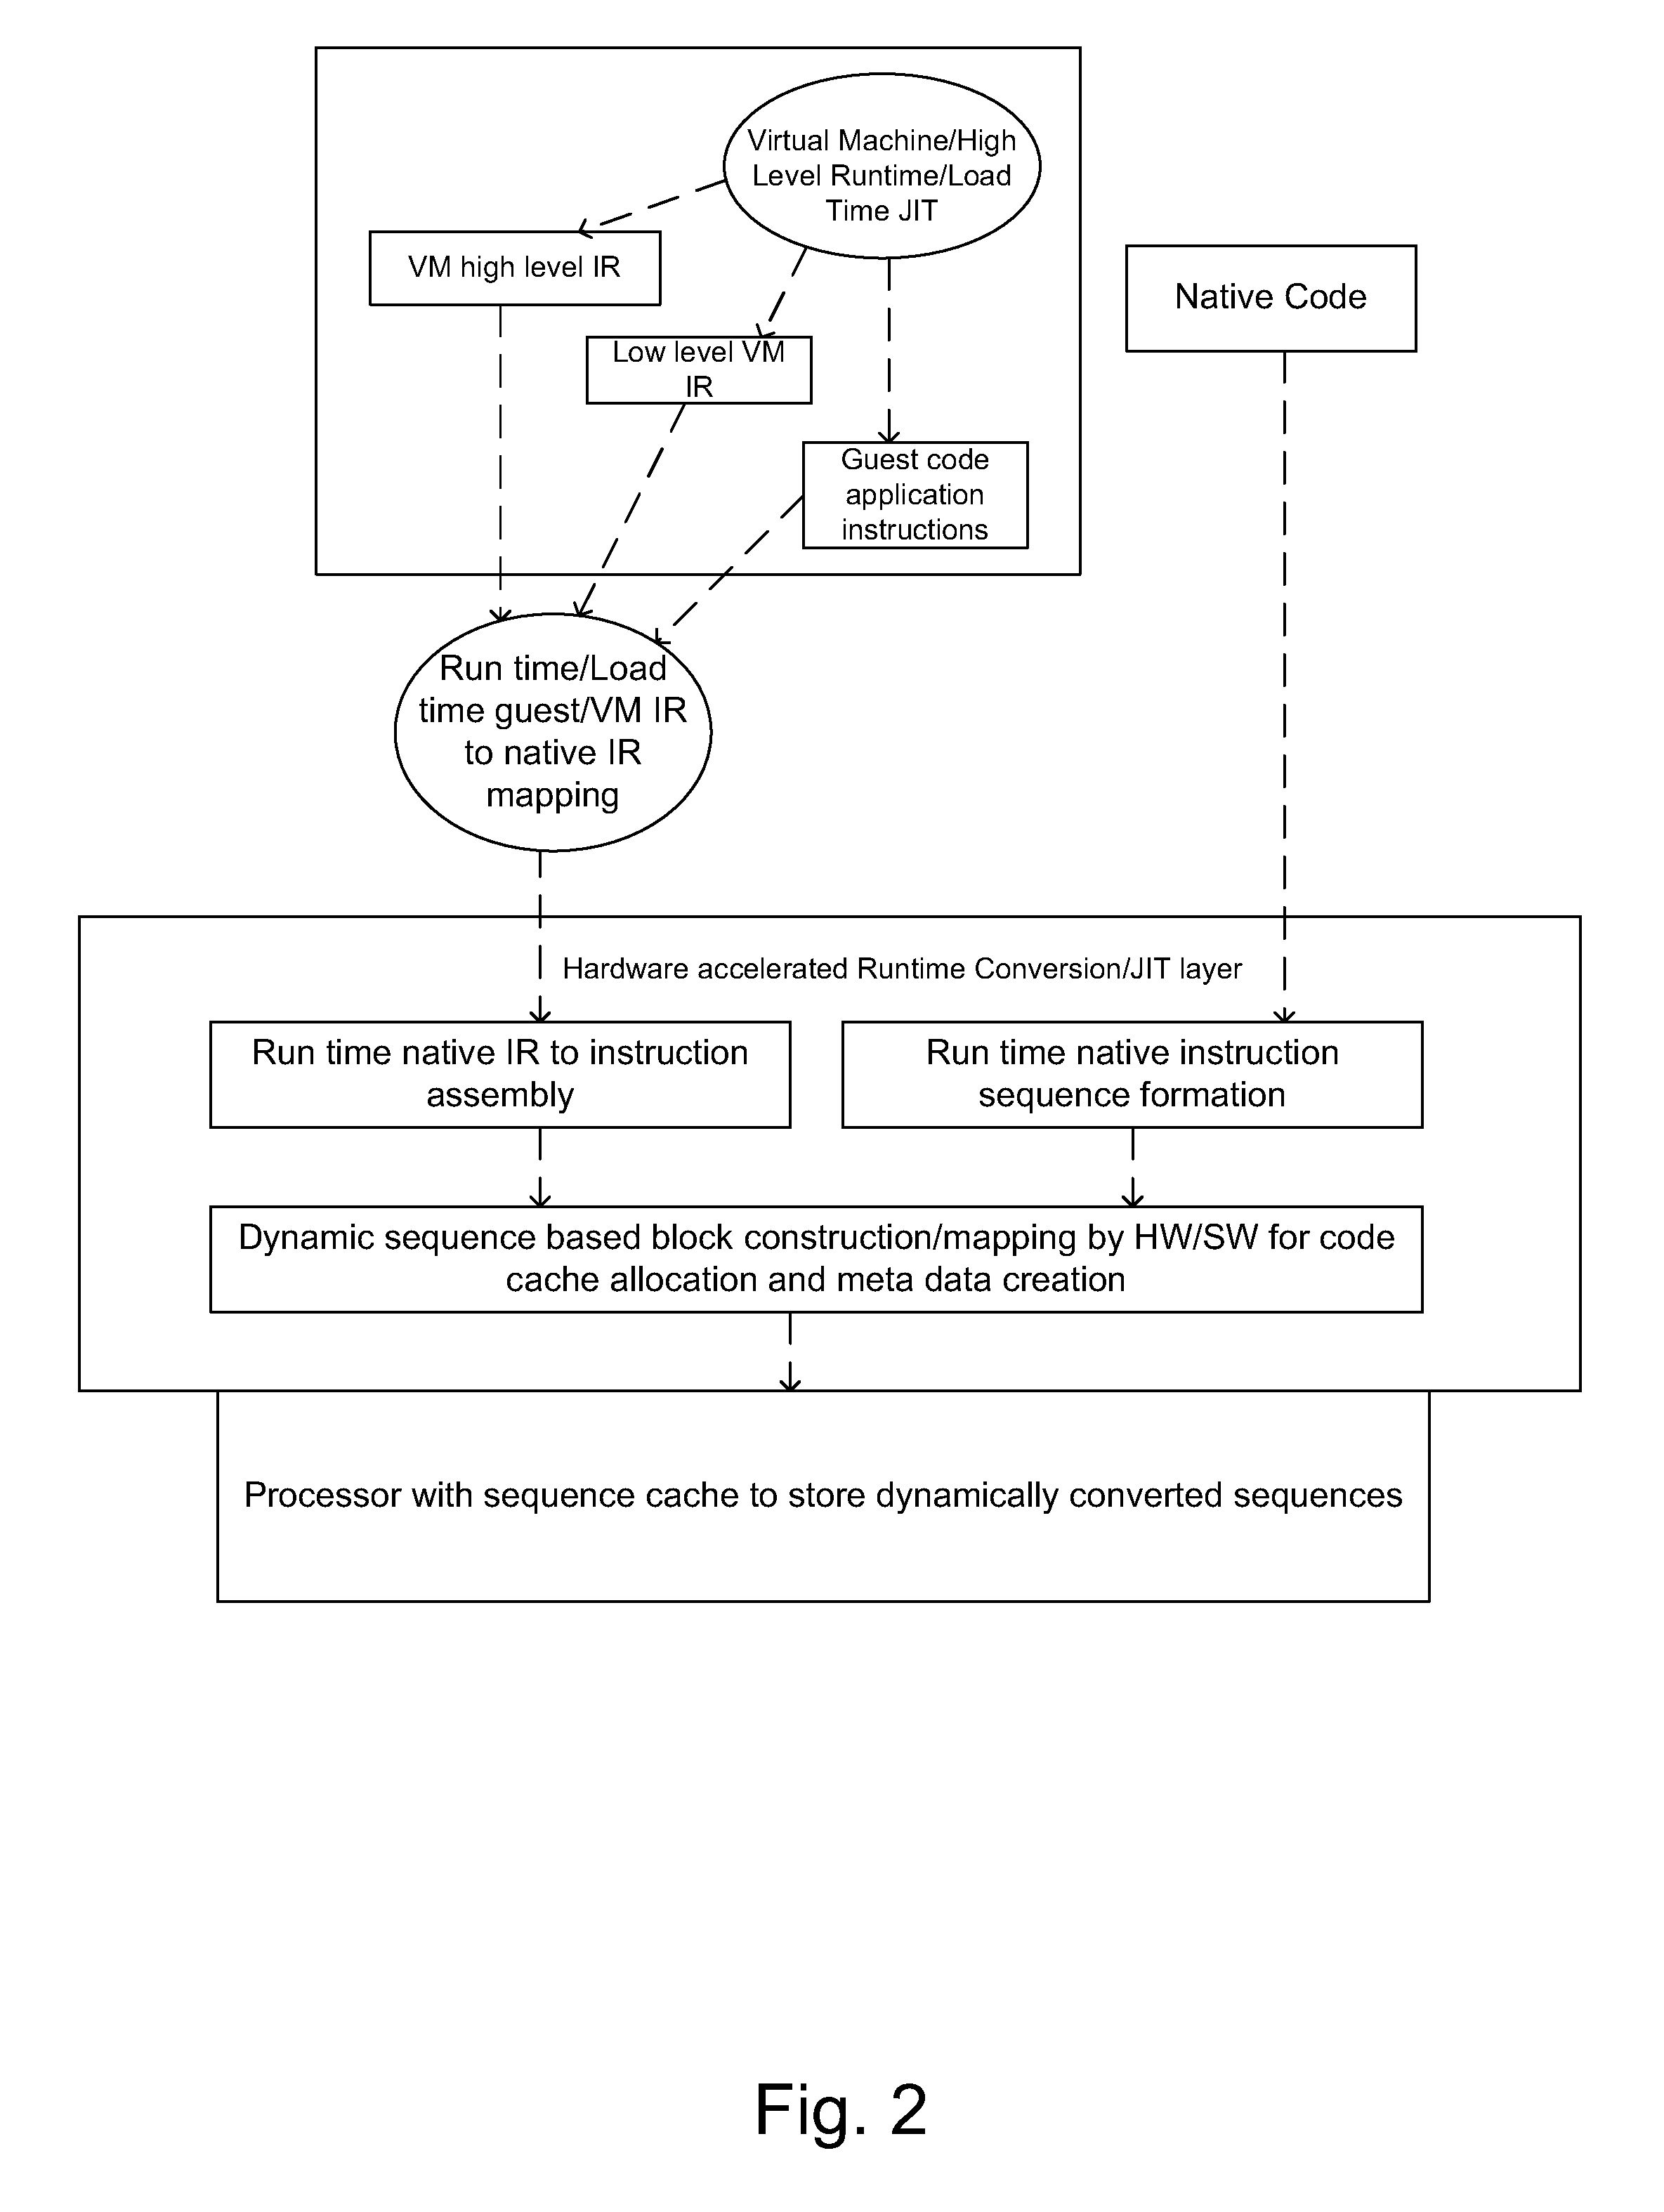 An allocation and issue stage for reordering a microinstruction sequence into an optimized microinstruction sequence to implement an instruction set agnostic runtime architecture